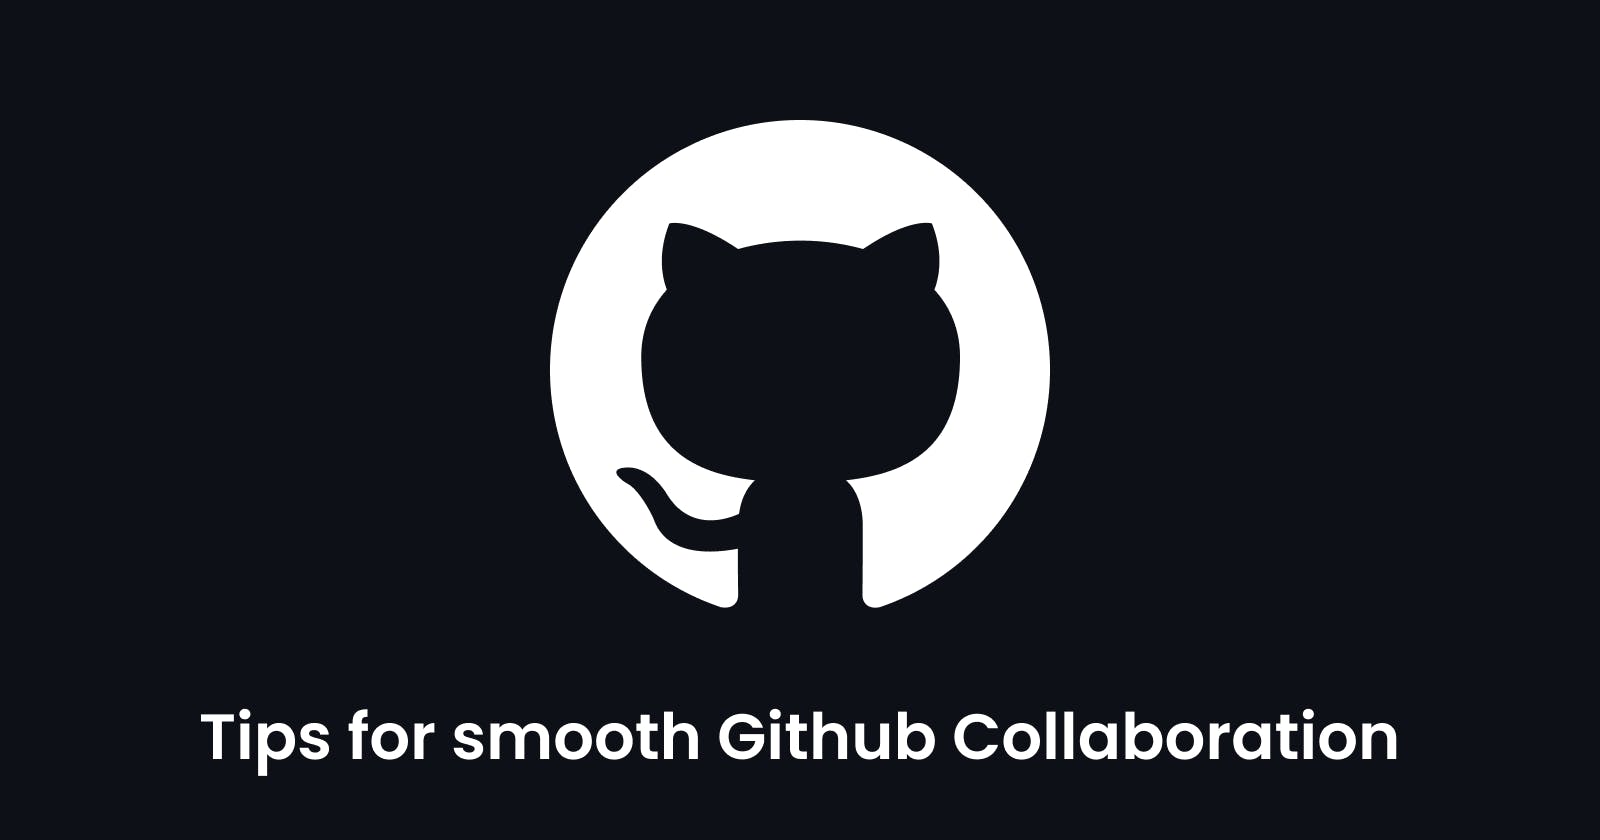 Maintaining a smooth collaboration workflow on Github